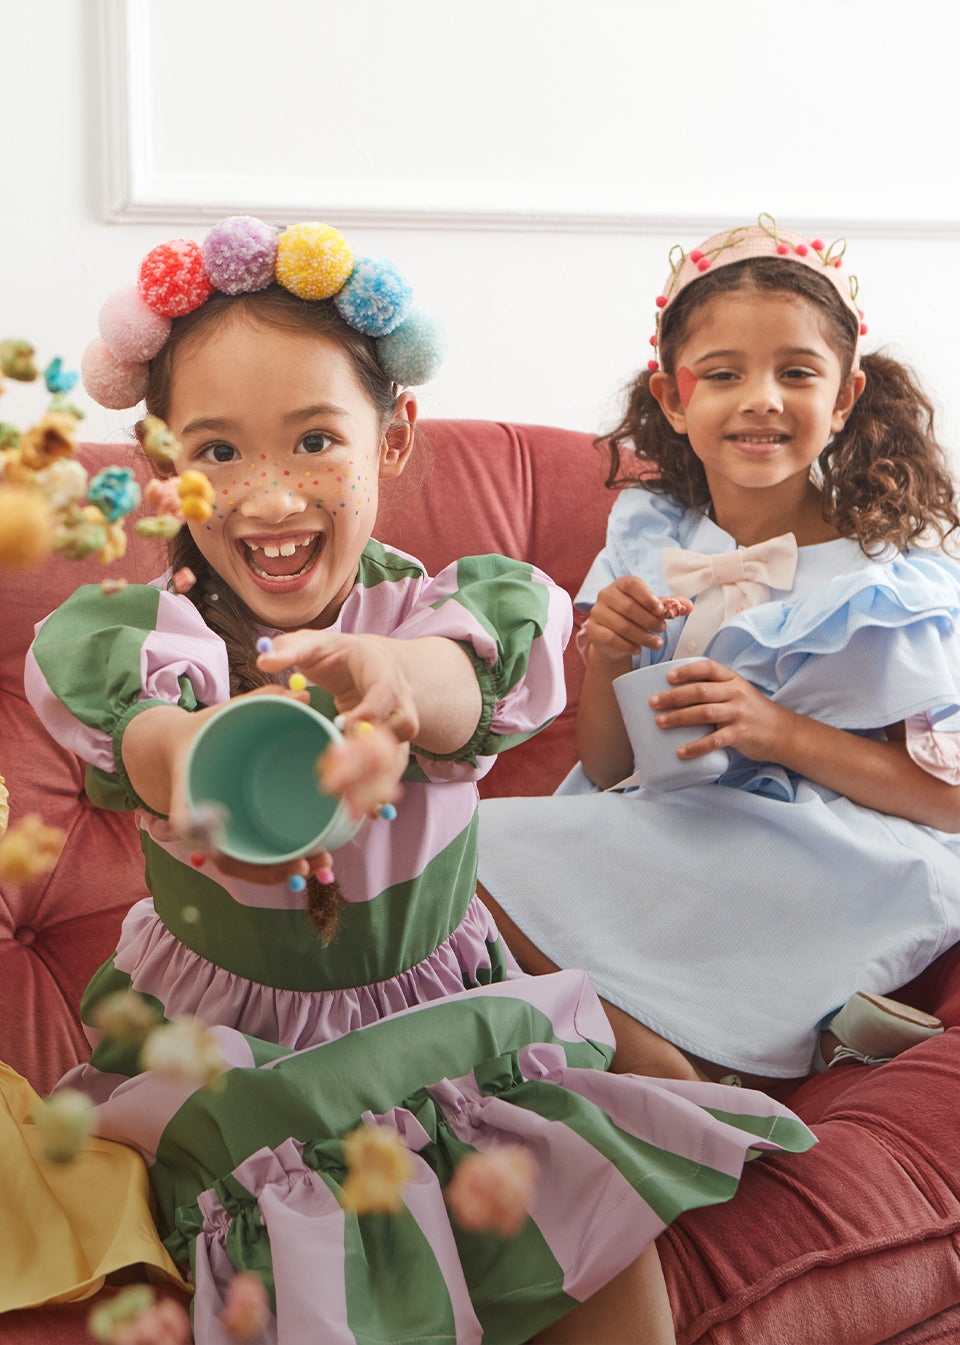 2 young girls sit on a sofa in colorful outfits with hair accessories whilst the girl on the right throws a cup of colored popcorn at the camera.